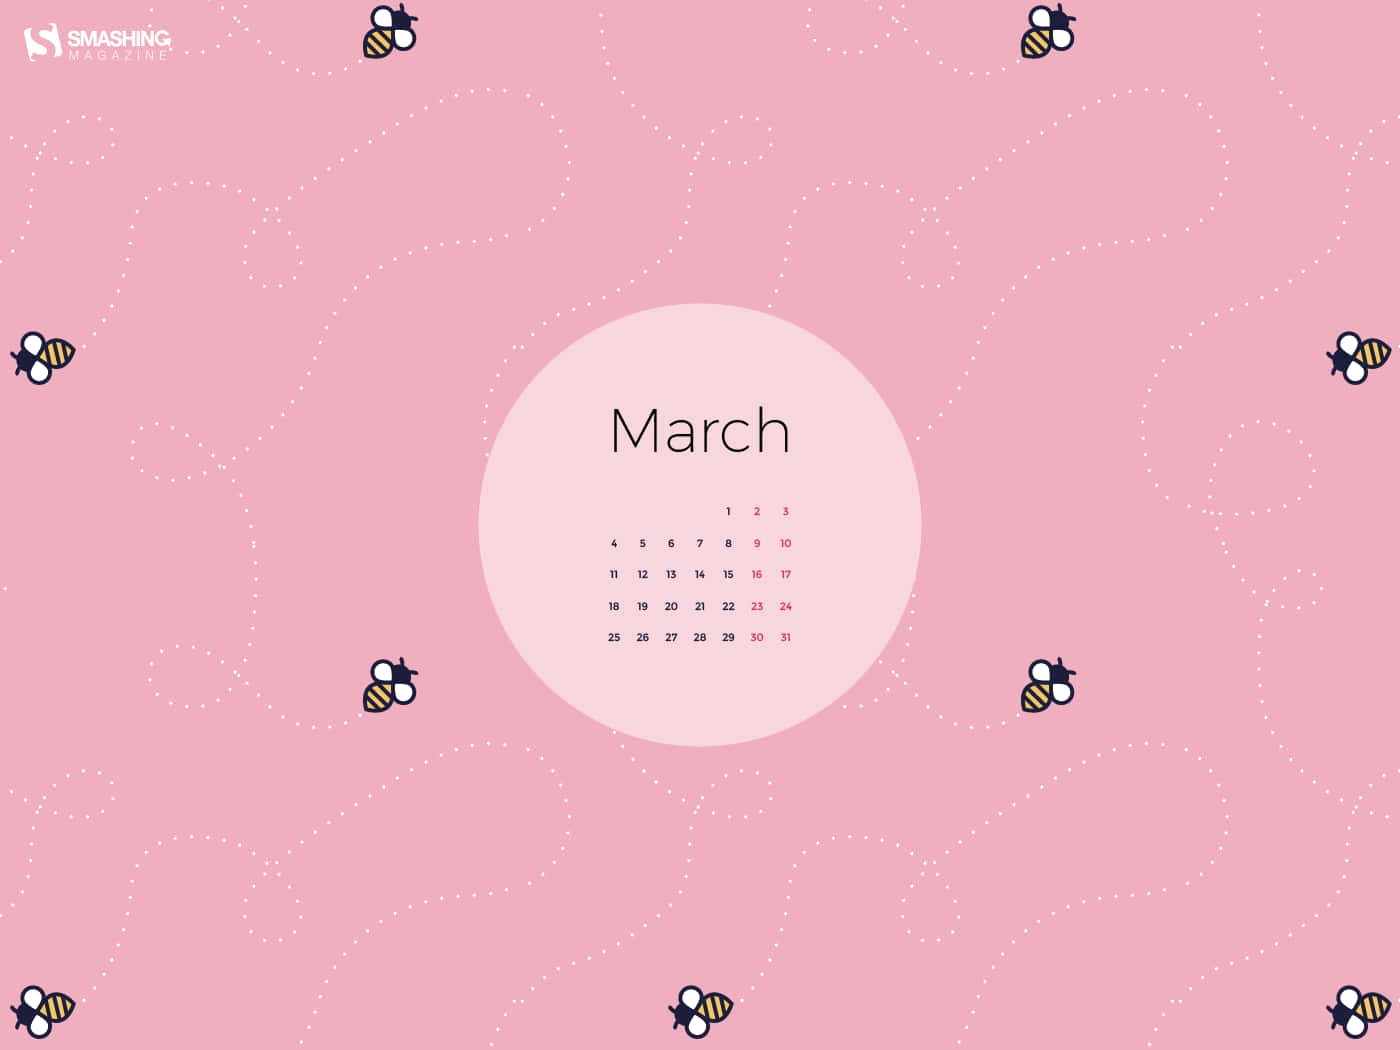 Celebrate the Start of a New Season with Cute March Wallpaper